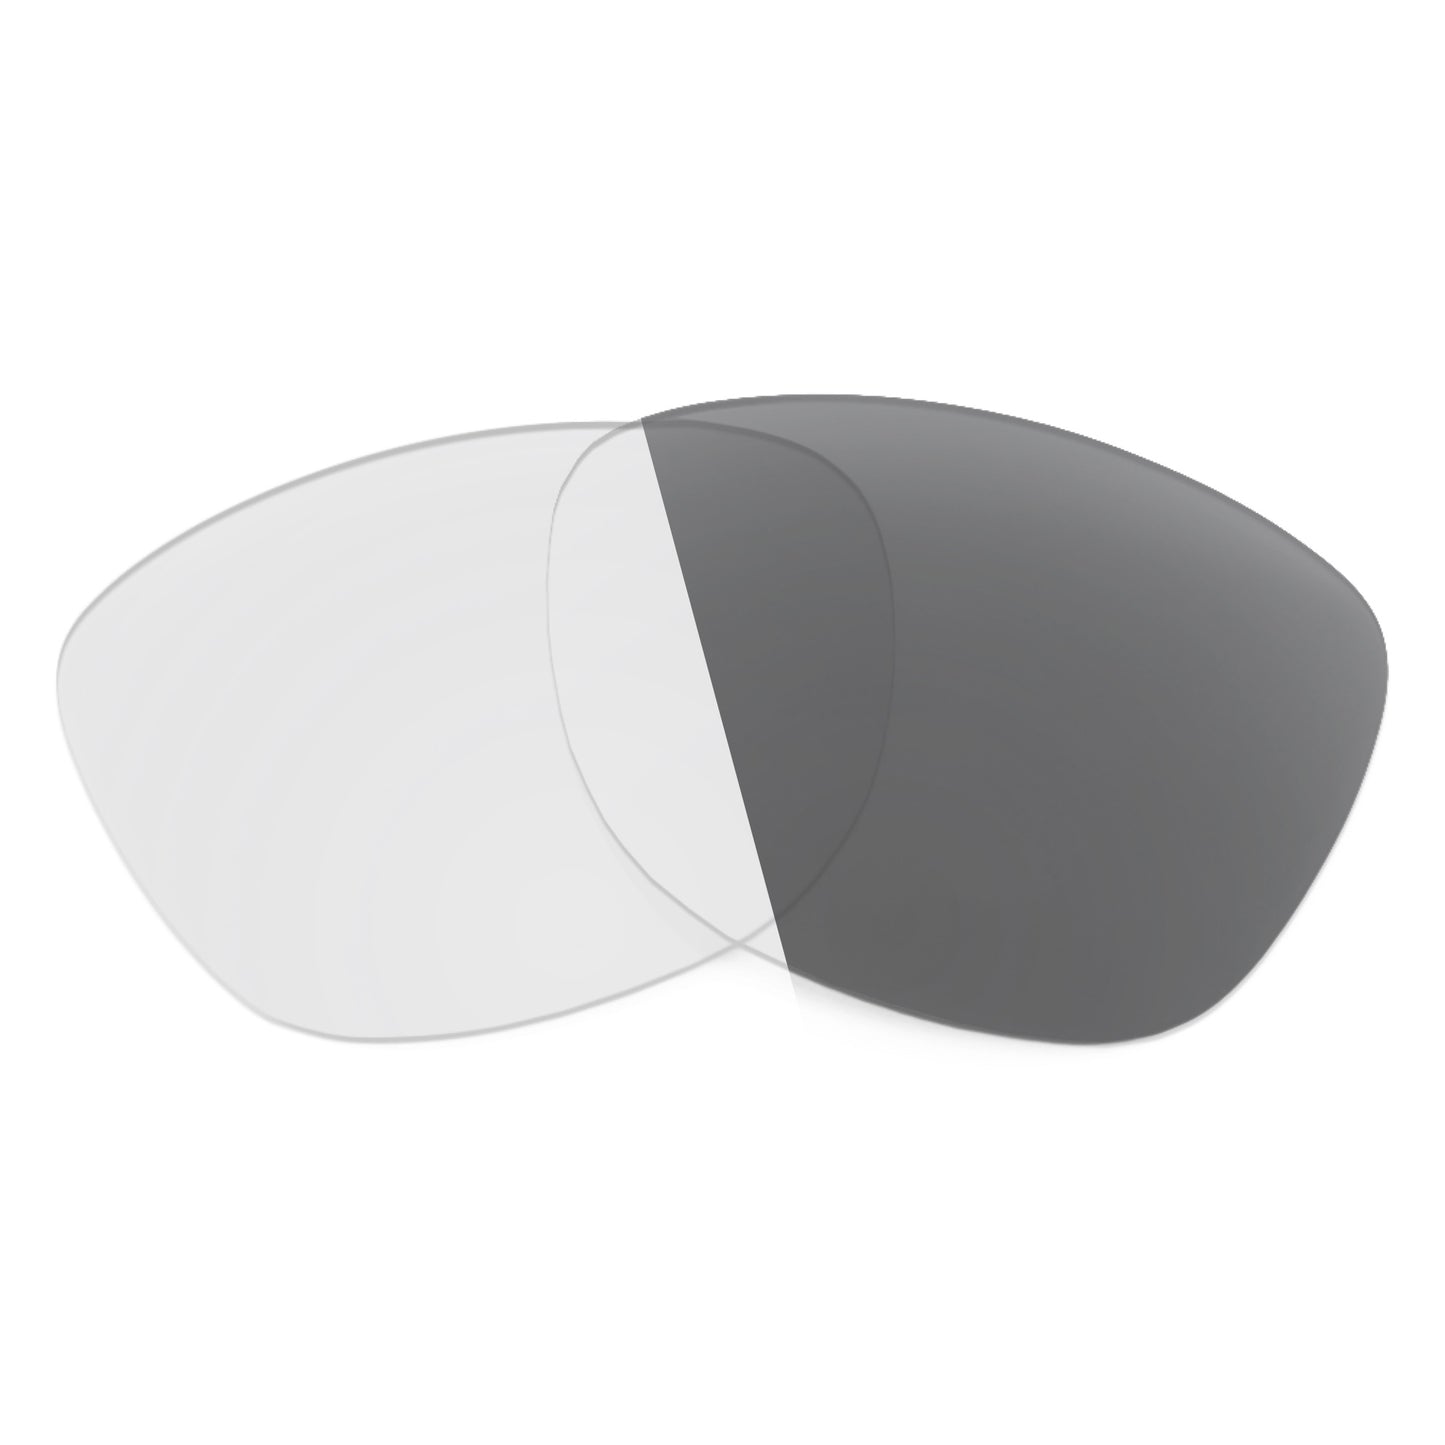 Revant replacement lenses for Wiley X Moxy Non-Polarized Adapt Gray Photochromic